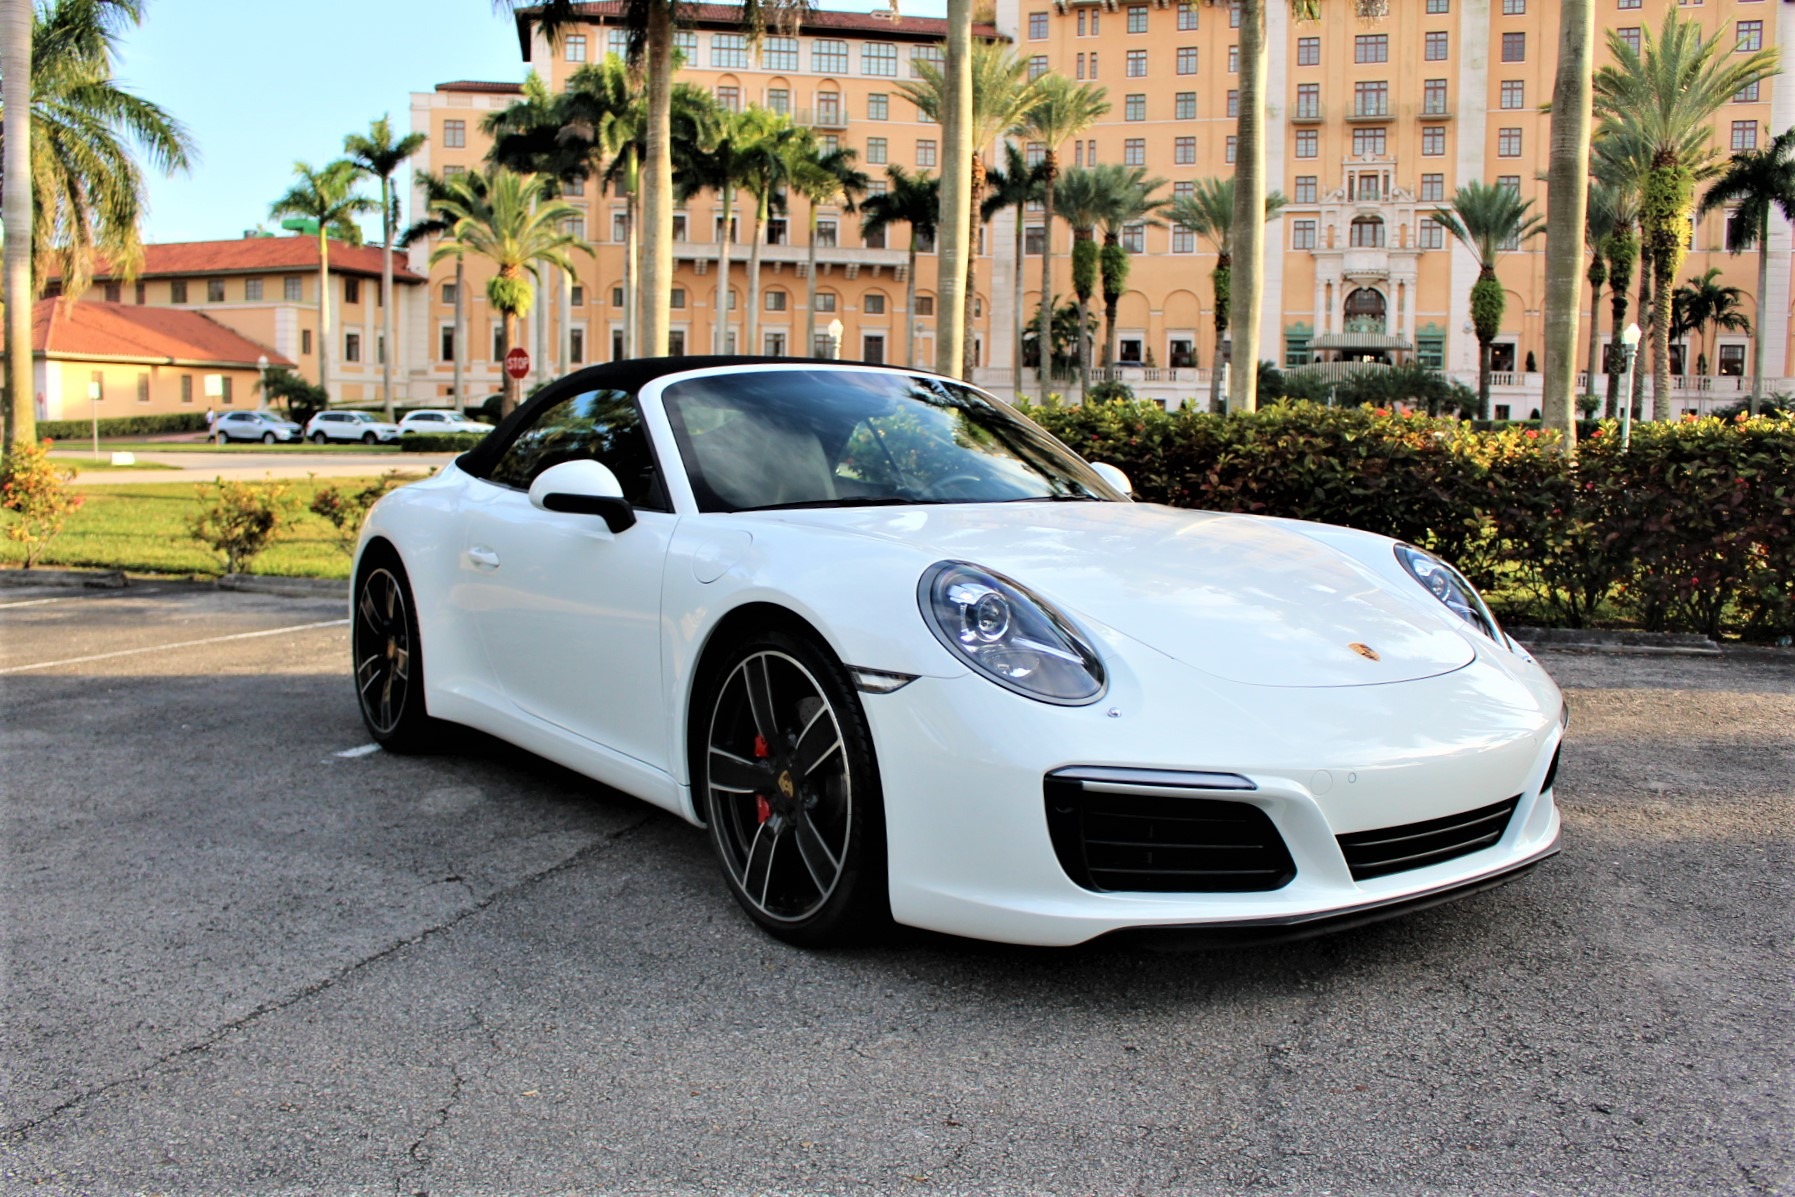 Used 2017 Porsche 911 Carrera S for sale Sold at The Gables Sports Cars in Miami FL 33146 3